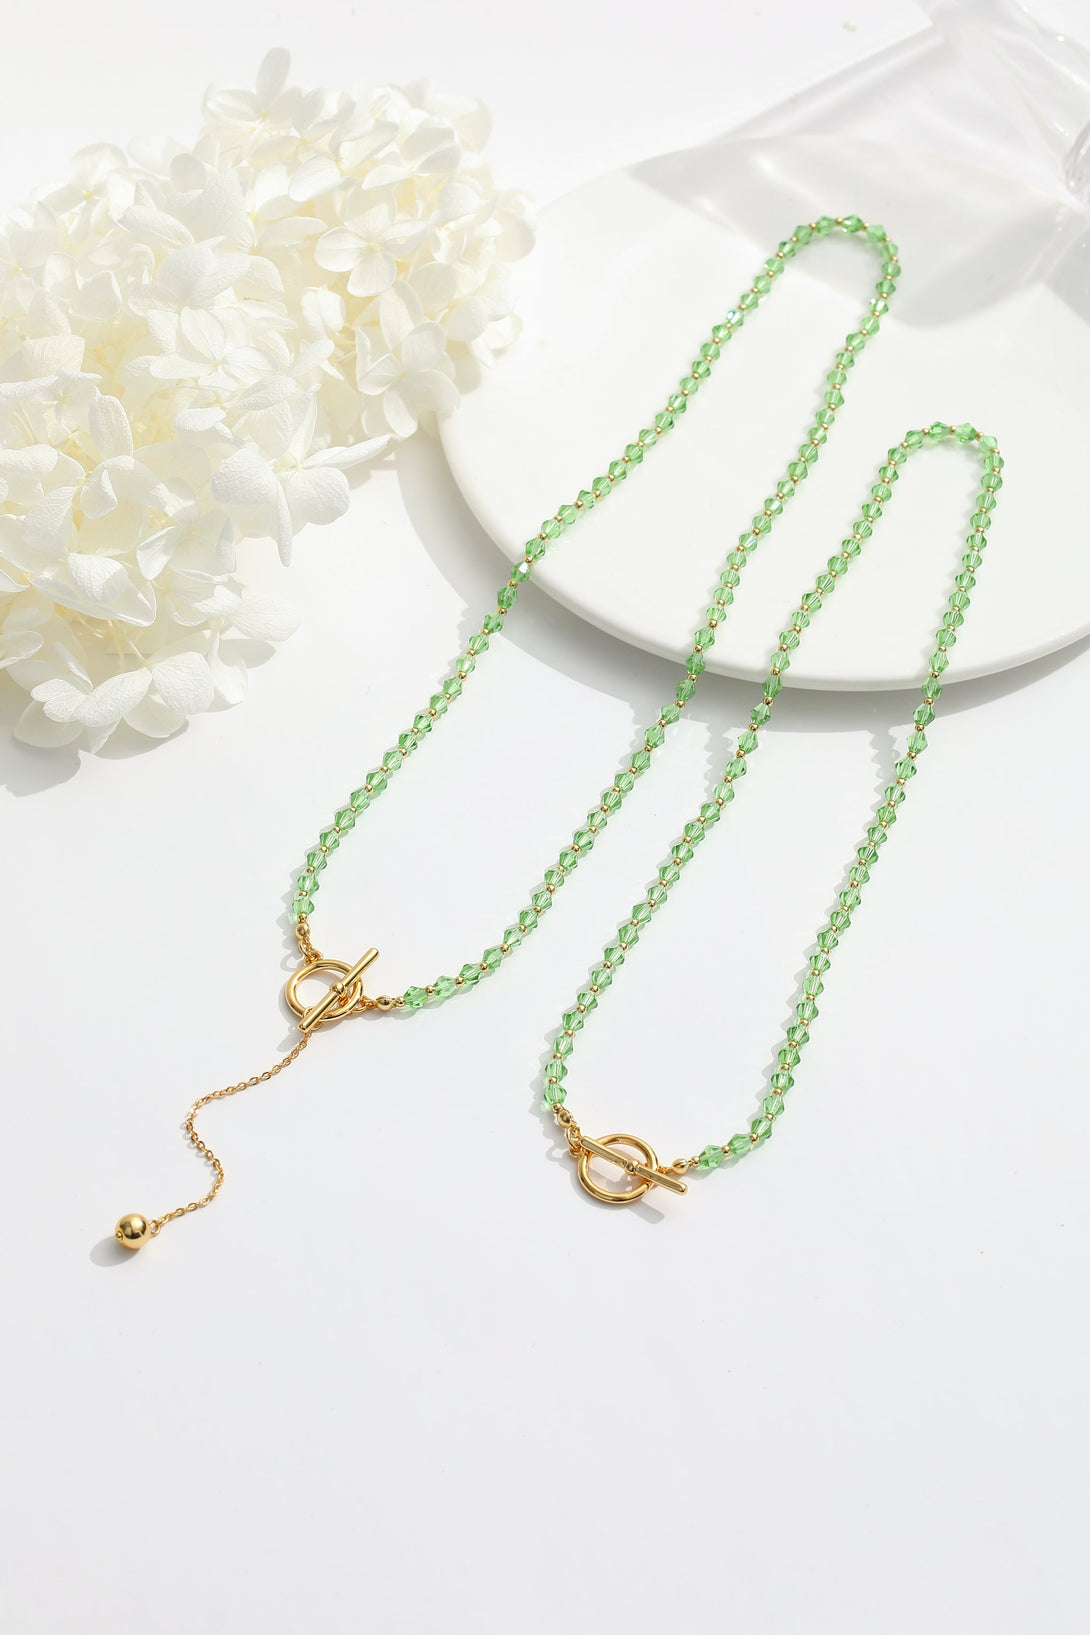 Green Crystal Beaded Necklace (Short) - Classicharms